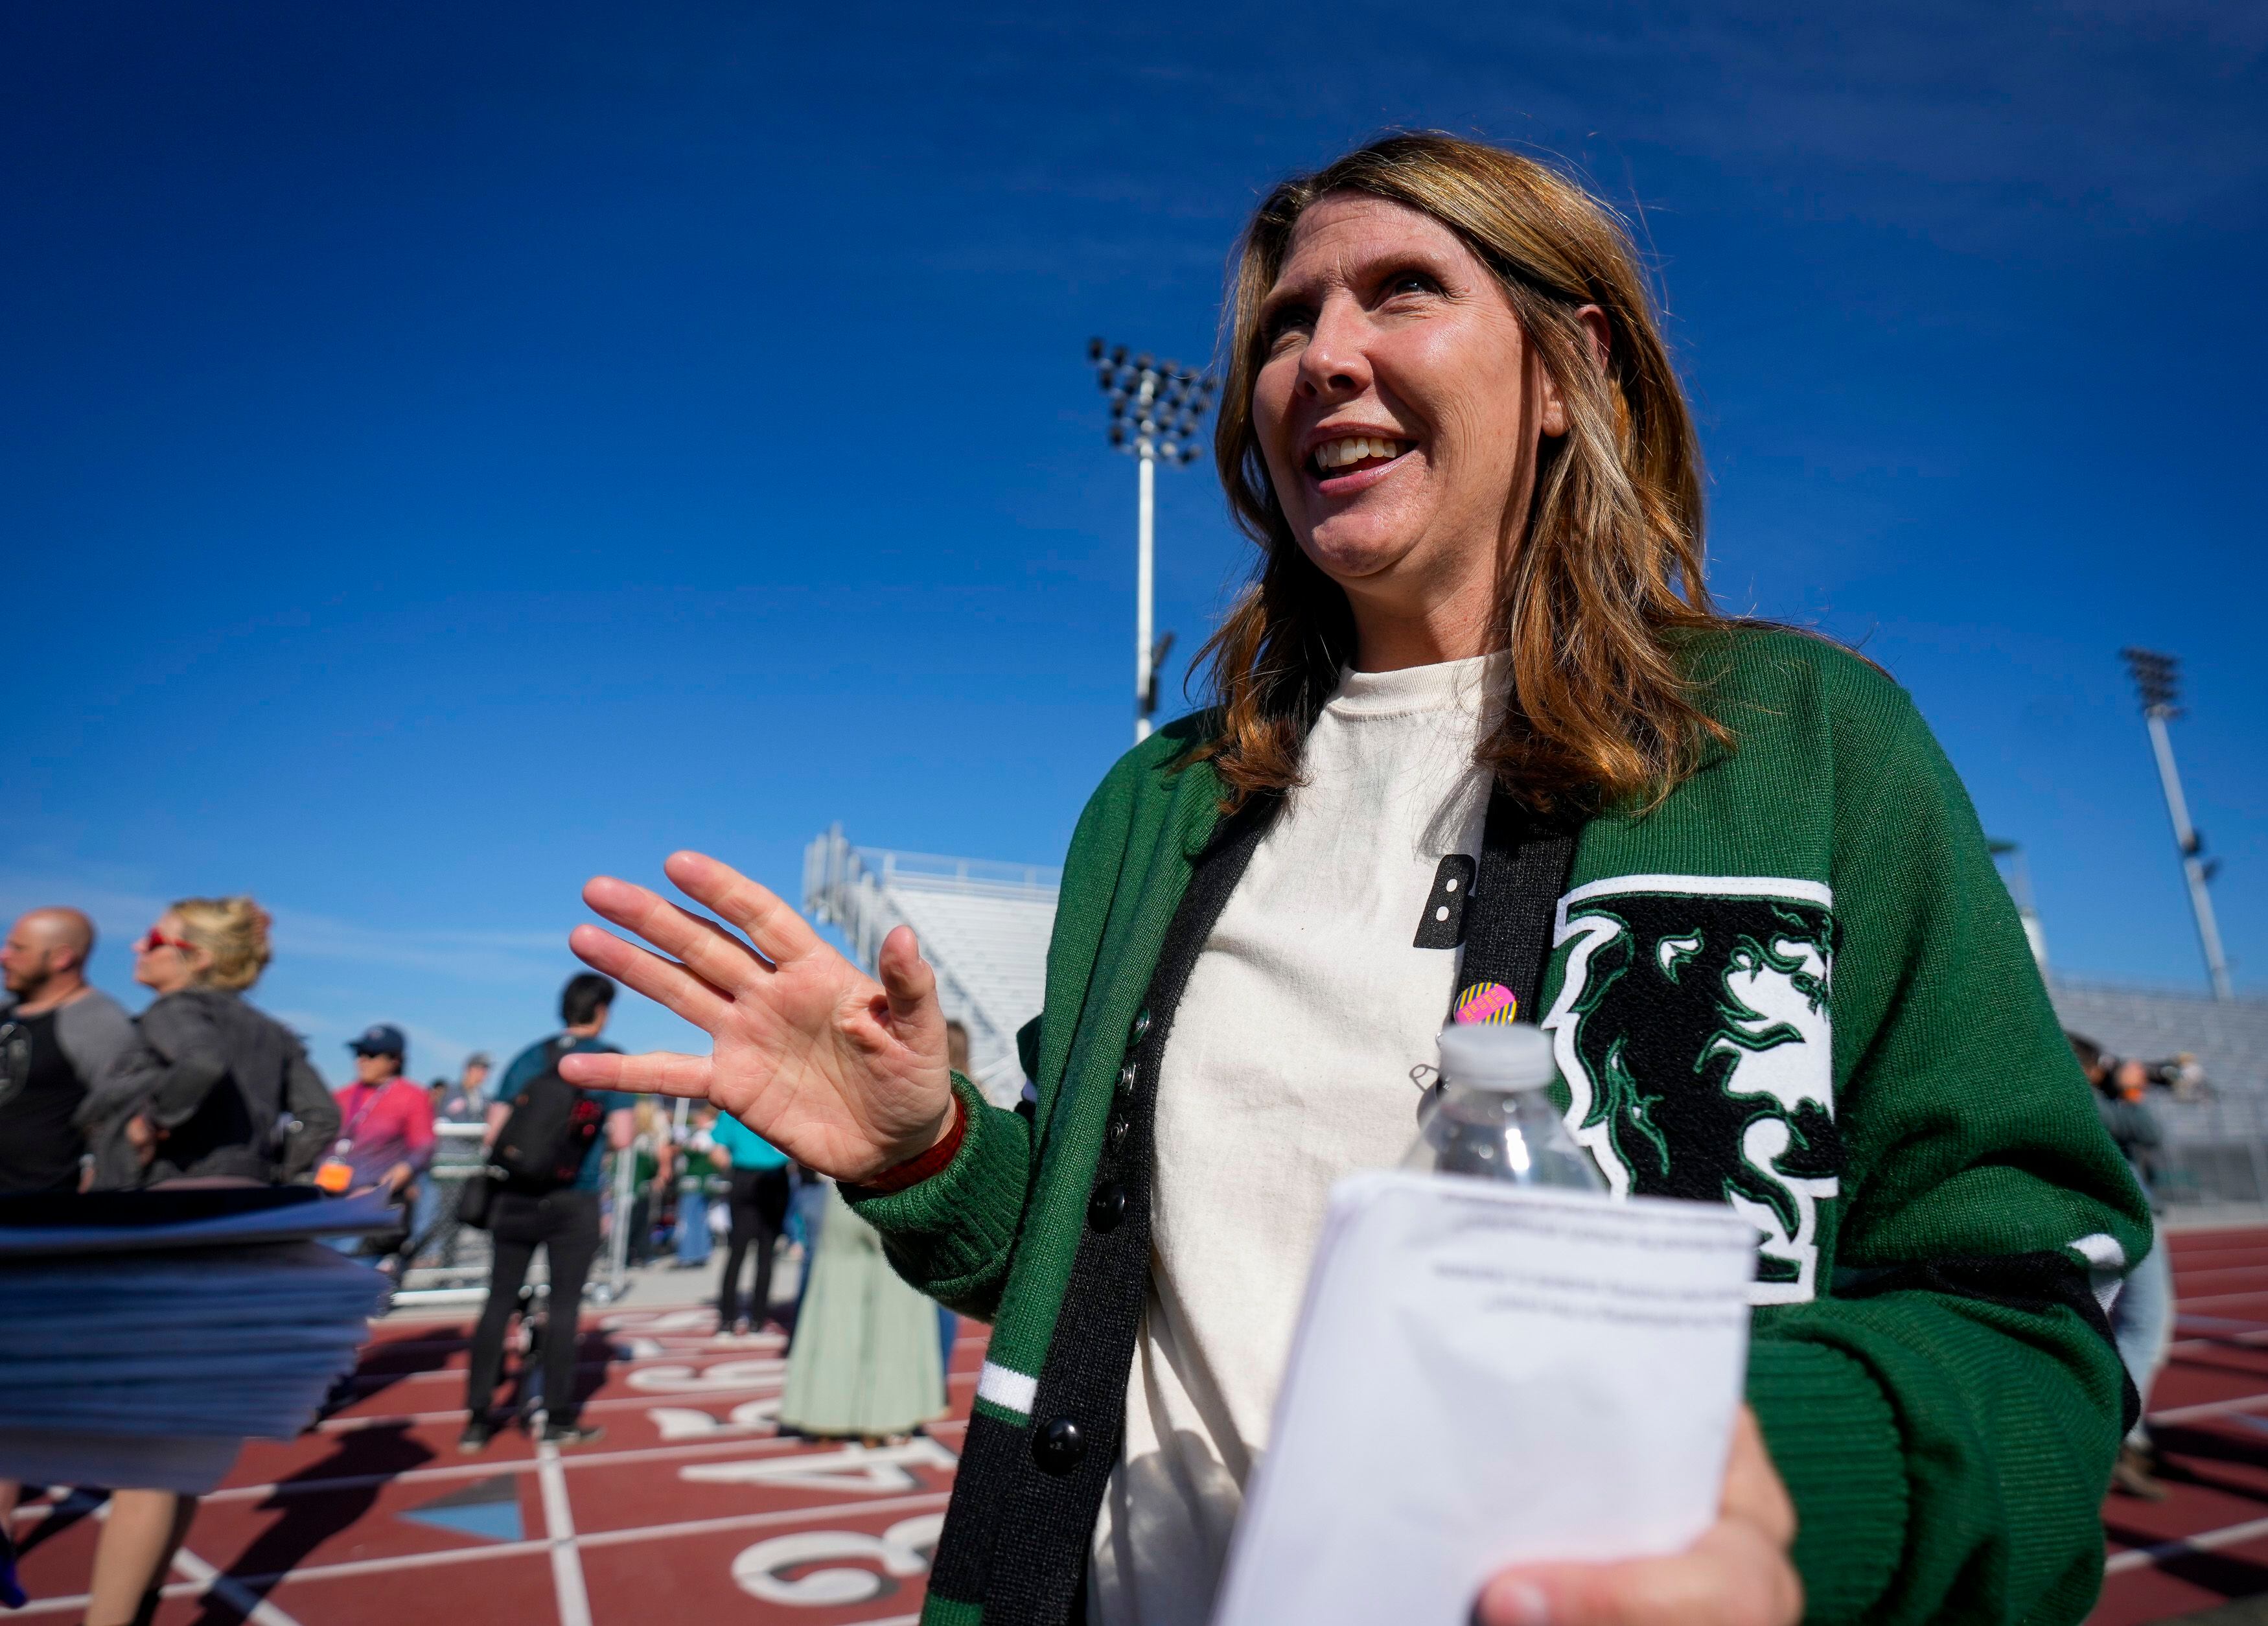 (Bethany Baker  |  The Salt Lake Tribune) Jenny Staheli, the student council advisor at Payson High School, speaks during an interview before a charity event to commemorate the 40th anniversary of the movie "Footloose" on the football field of Payson High School in Payson on Saturday, April 20, 2024.